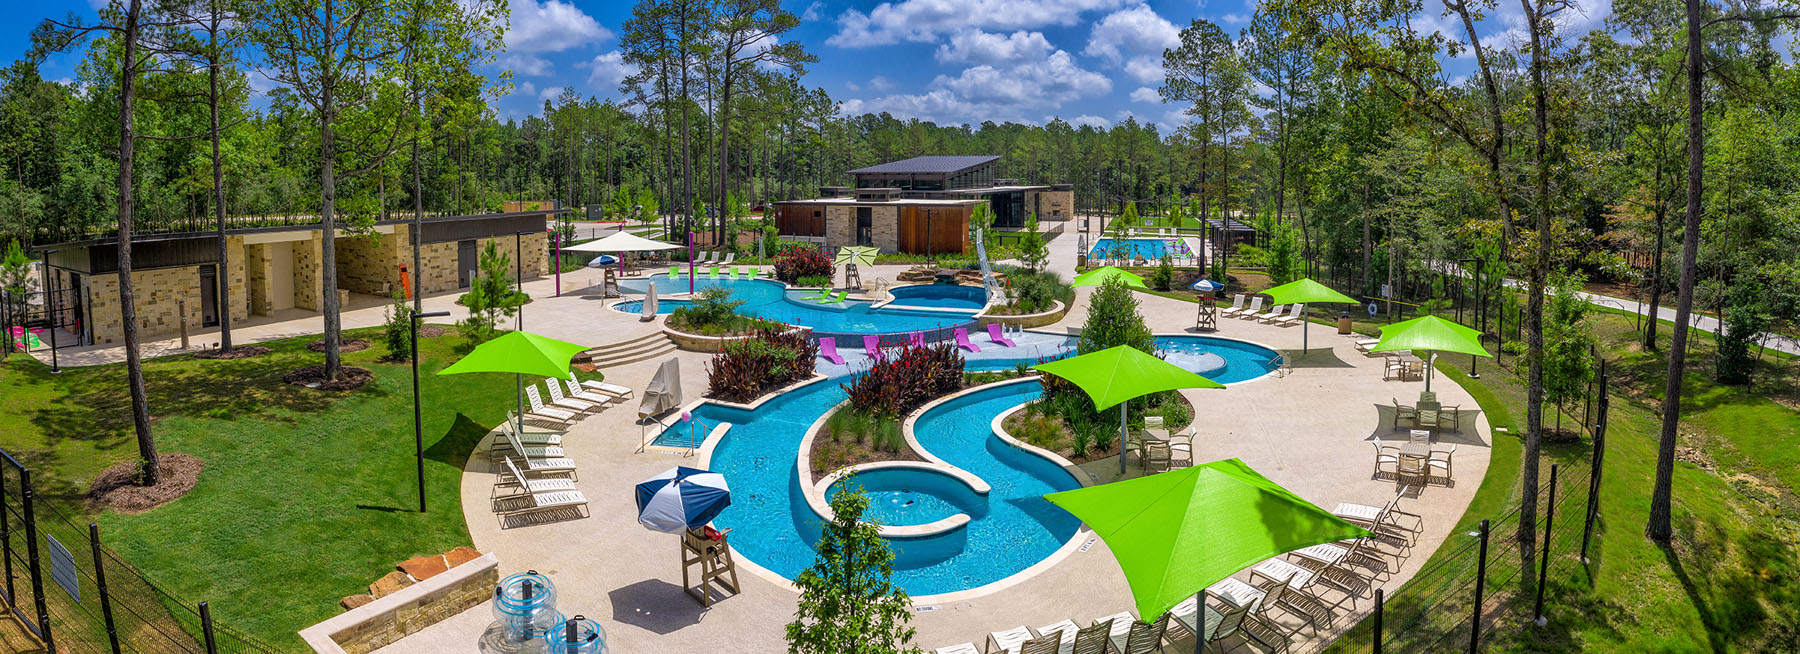 Up To $10,000 In New Home Incentives For The Woodlands Hills